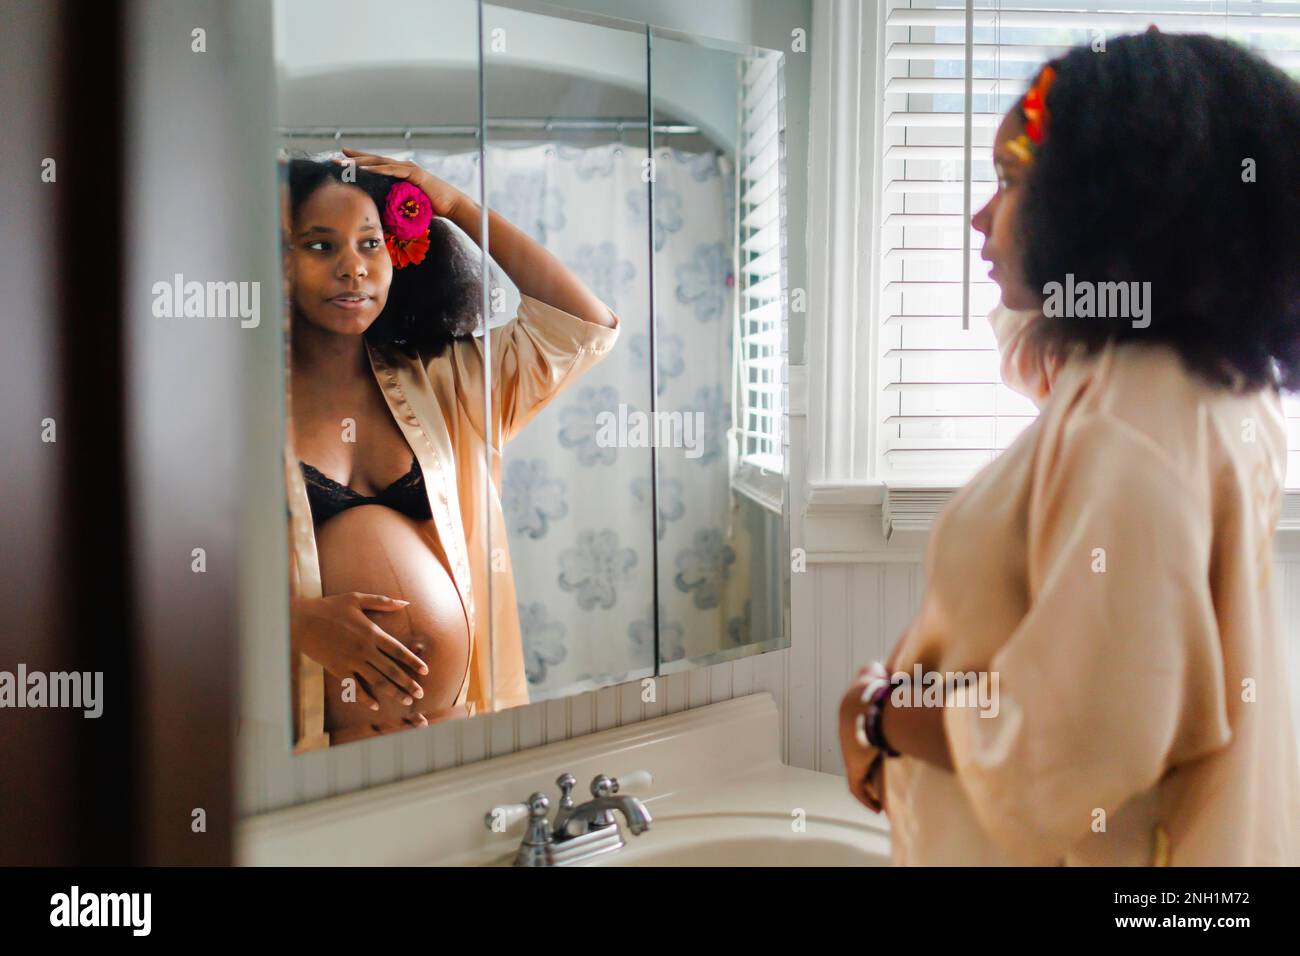 A young pregnant woman looks at herself in mirror Stock Photo